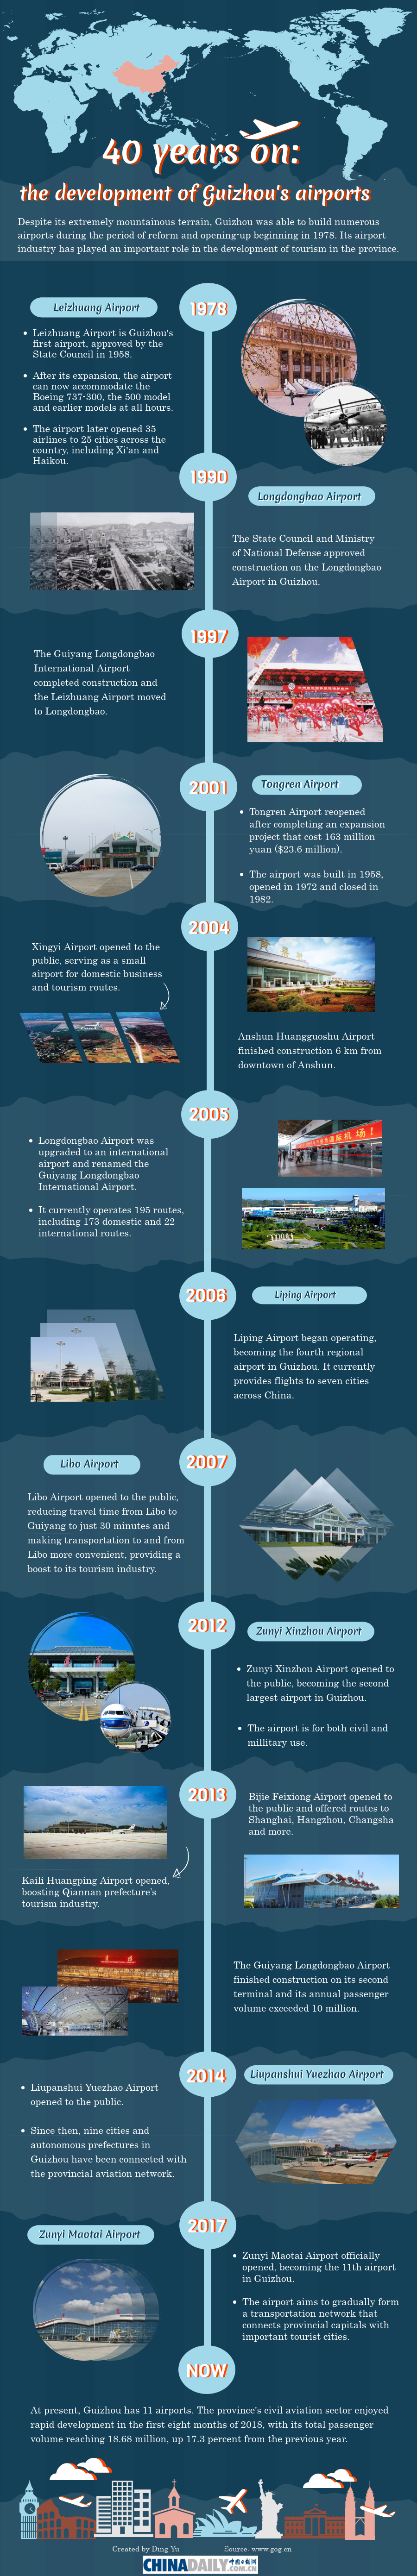 40 years on: the development of Guizhou's airports